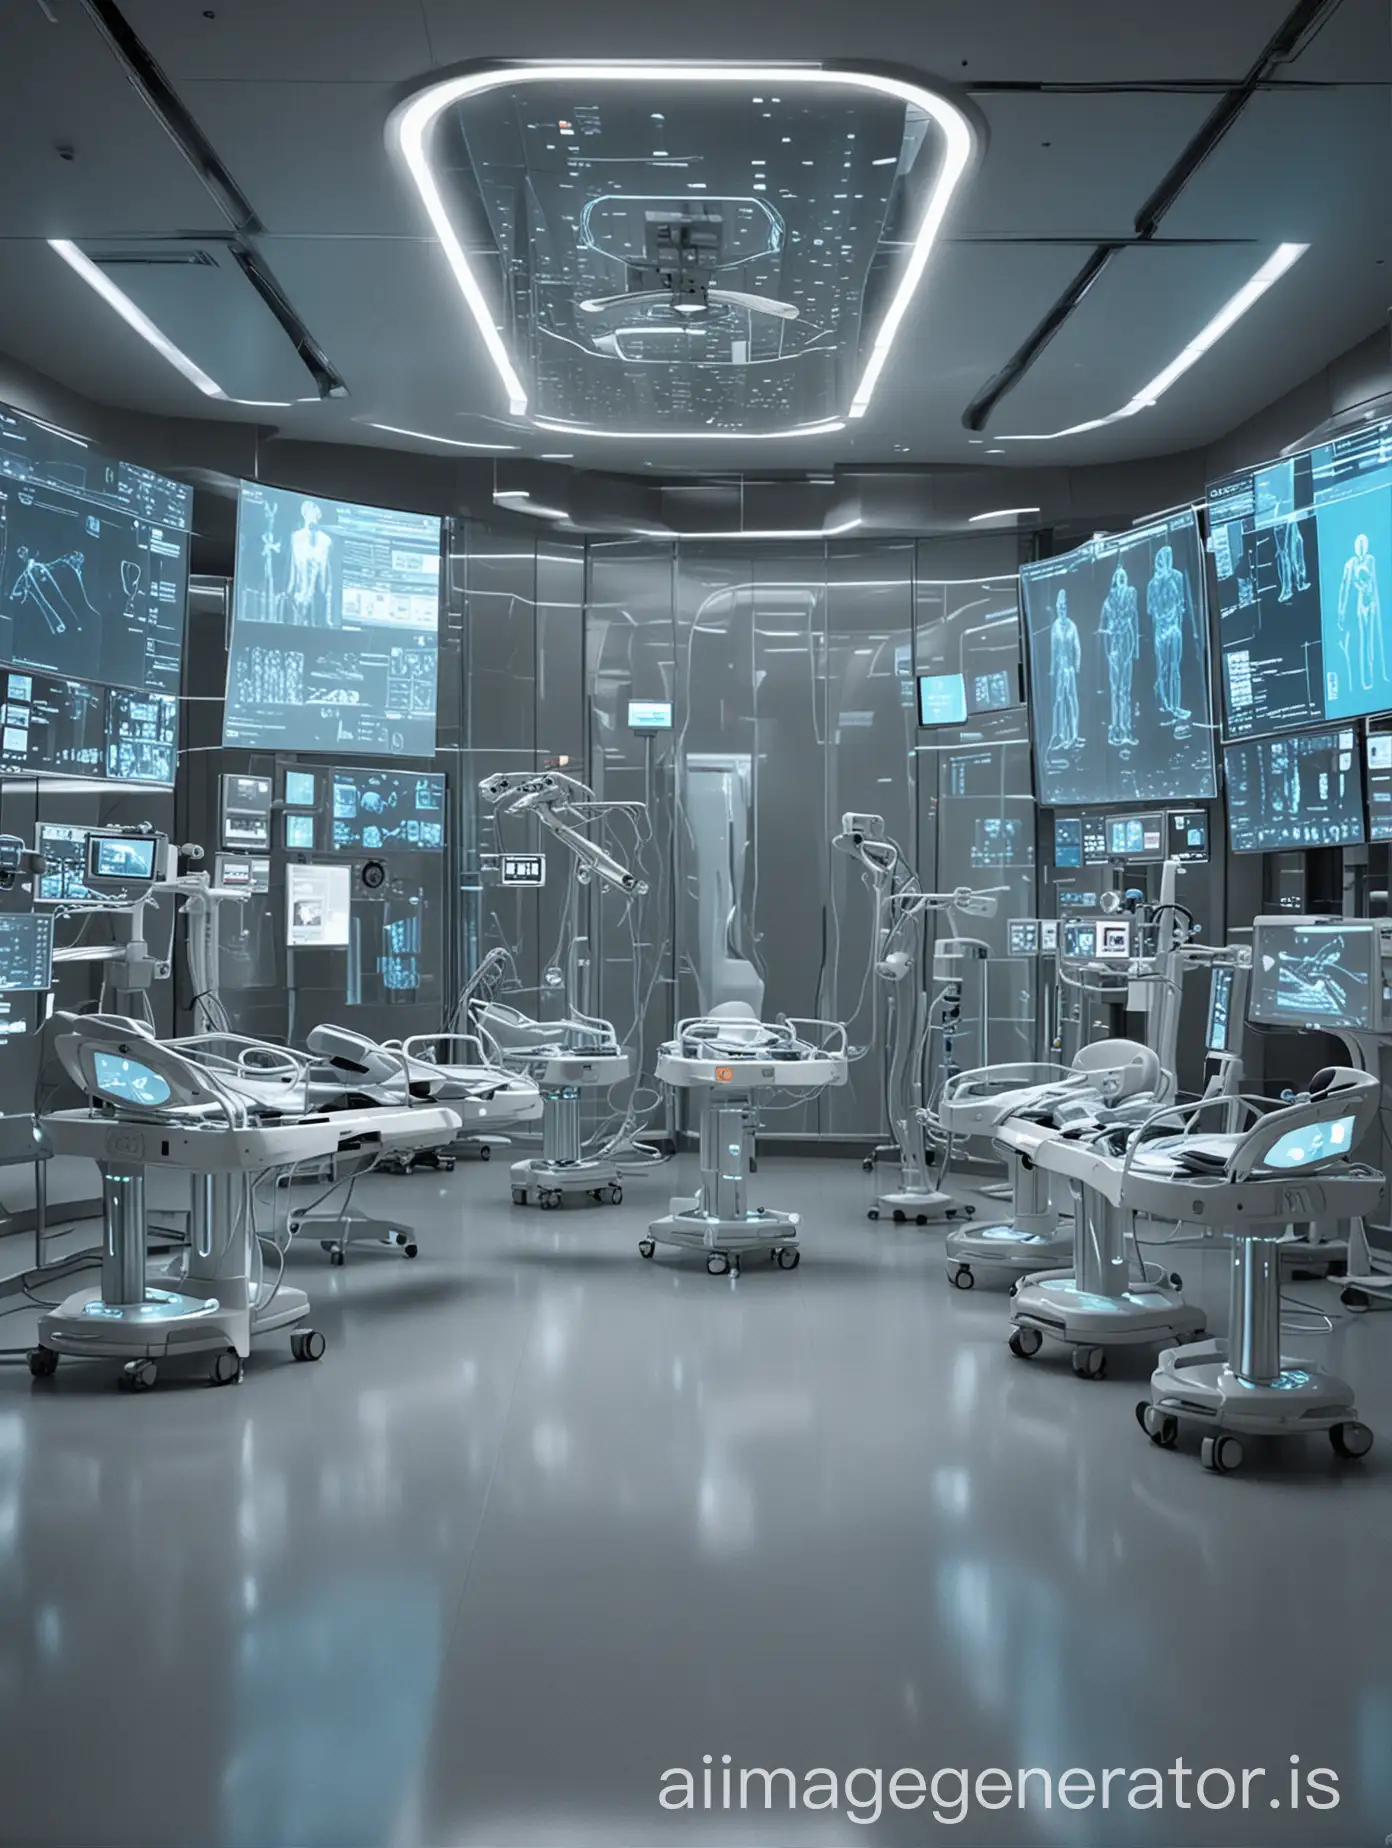 "An advanced medical facility of the future featuring sleek, transparent, and luminous medical equipment integrated into a futuristic architectural design. The space is filled with holographic displays showcasing biomedical data and virtual simulations of medical procedures. A team of robotic assistants work alongside human medical professionals, demonstrating the seamless integration of technology and healthcare."